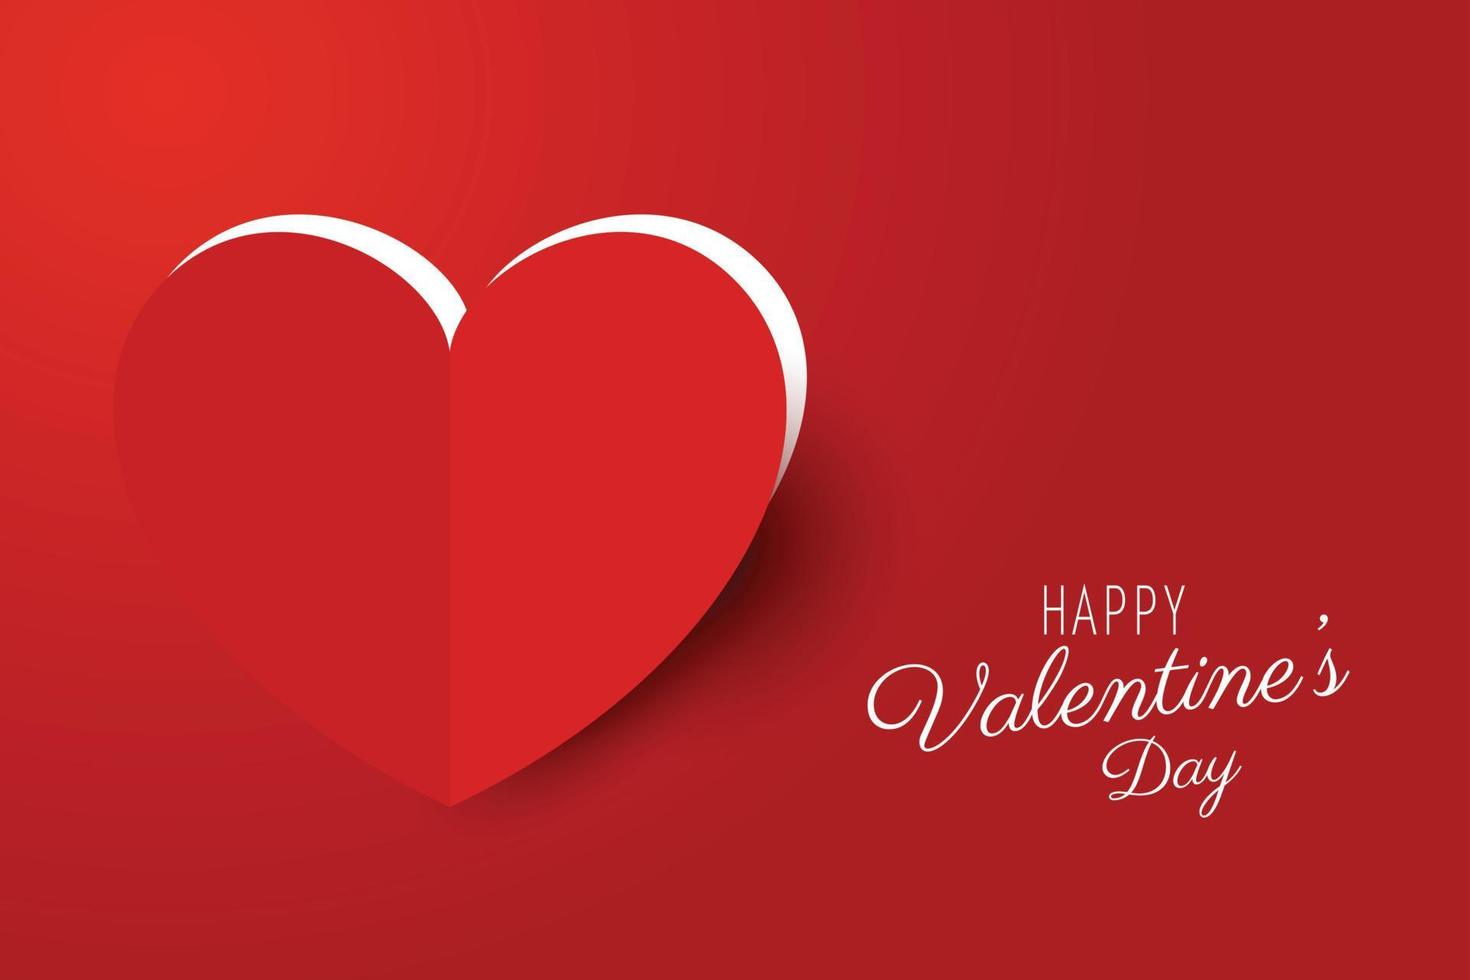 Happy Valentines day, Red Heart from paper. Very Good Holiday Card. Illustrator vector